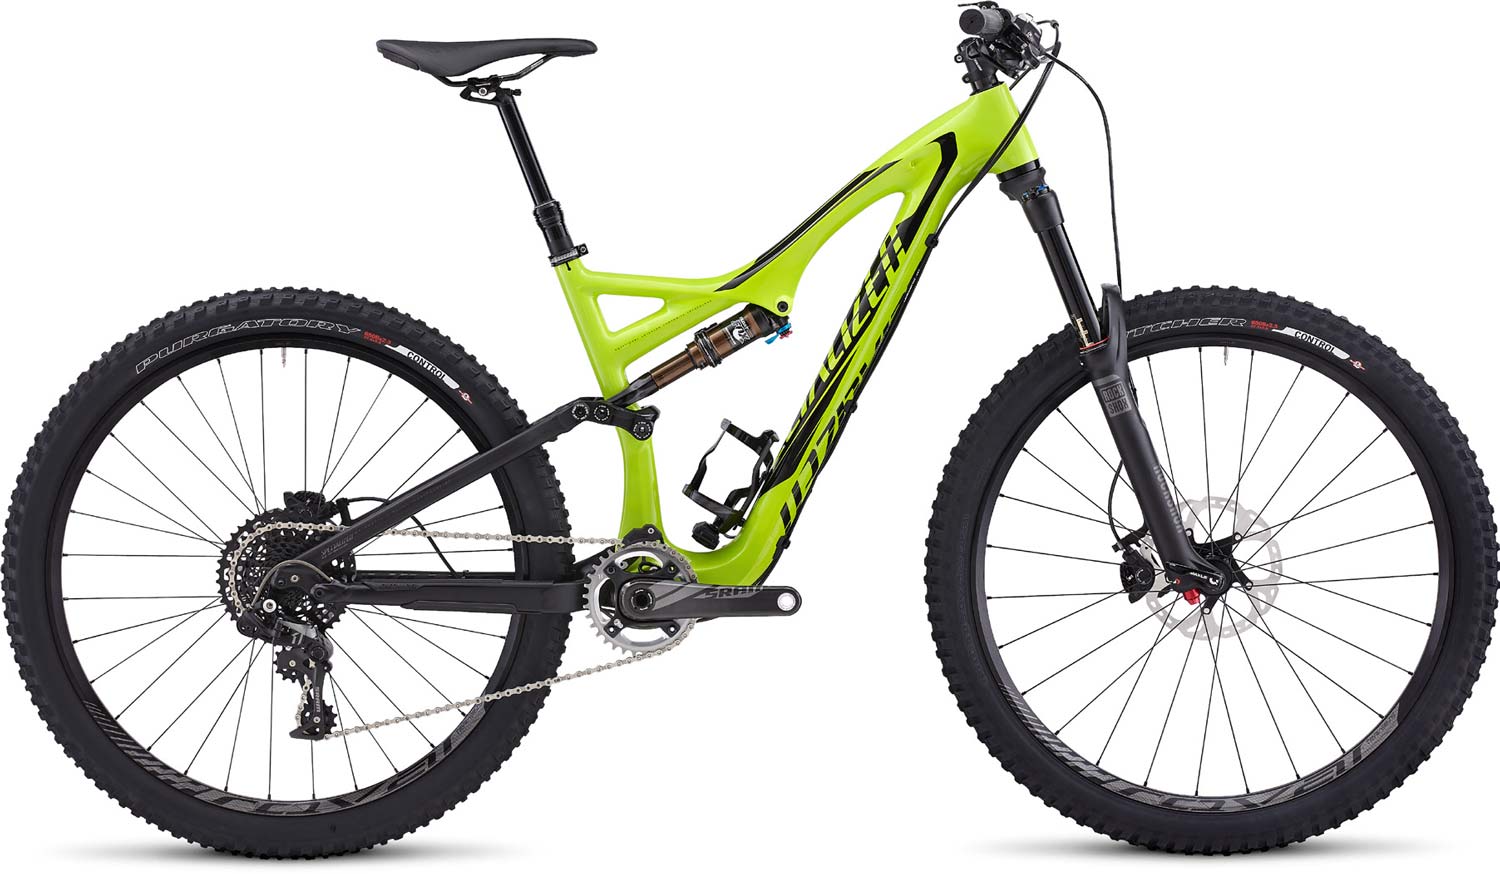 specialized stumpjumper bike mountain fsr evo 650b carbon expert models bikes mtb suspension official limited edition goes stumpy inch tires